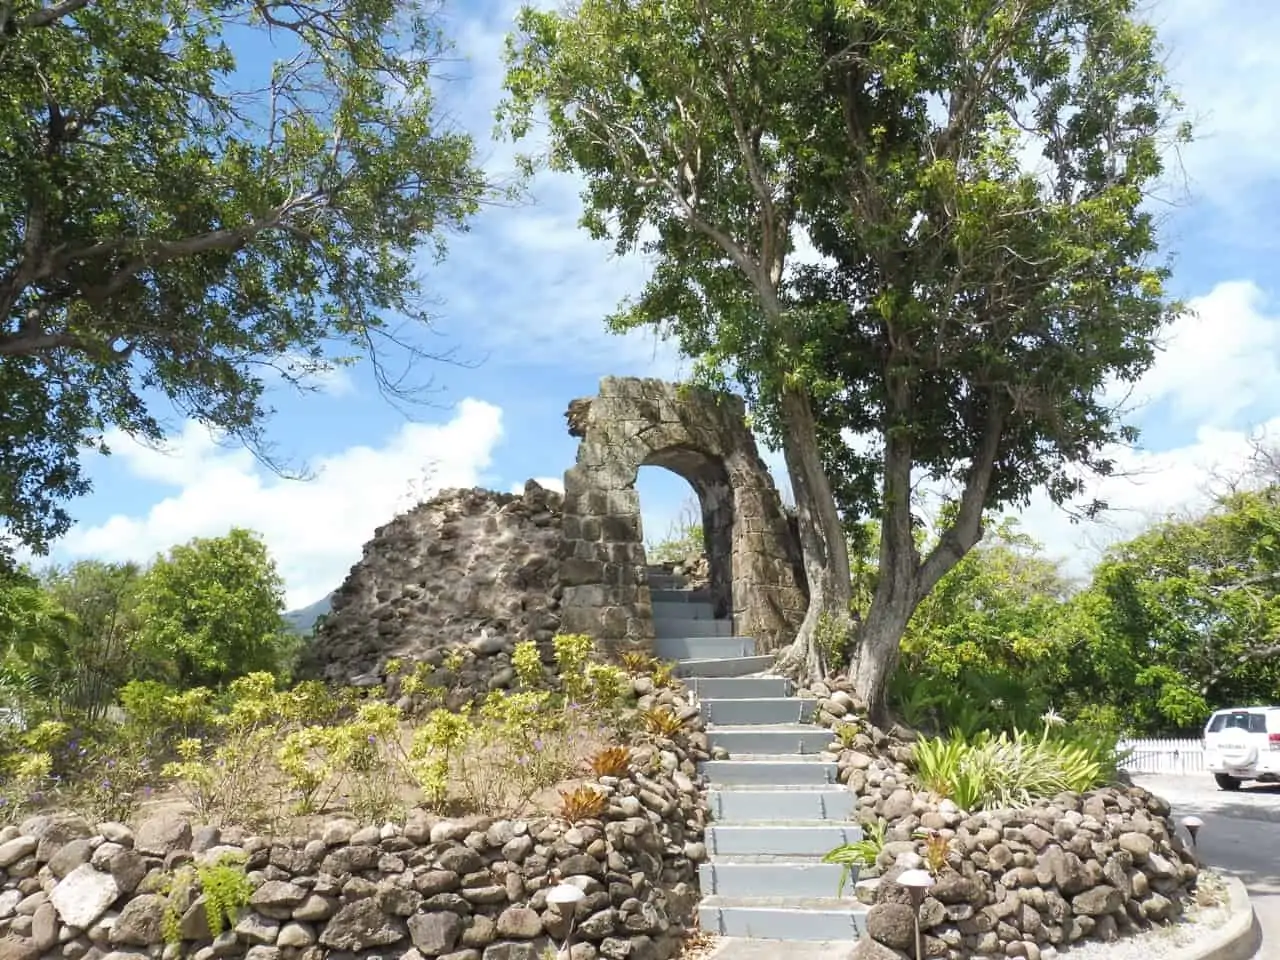 Remains of a sugar mill on the island of Nevis.